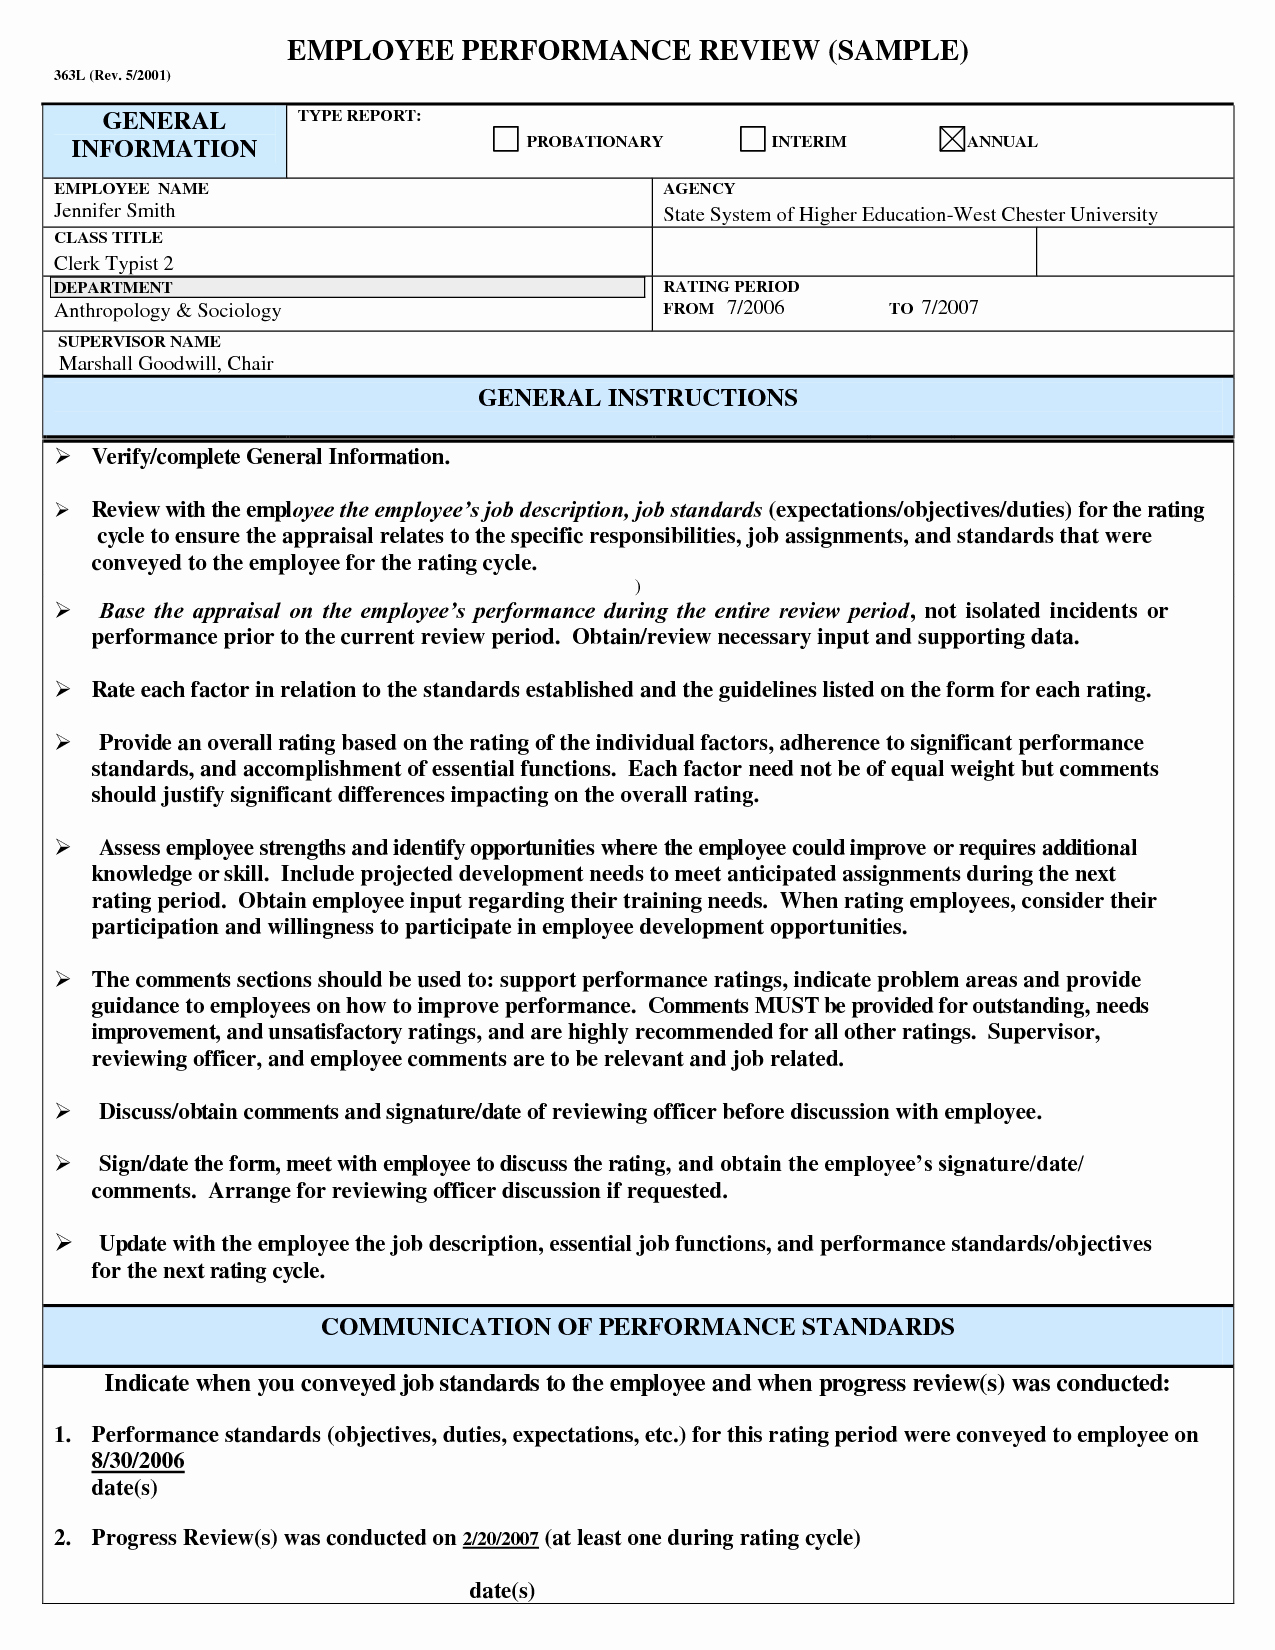 Employee Performance Evaluation Template Awesome Employee Performance Review Sample Frompo 1